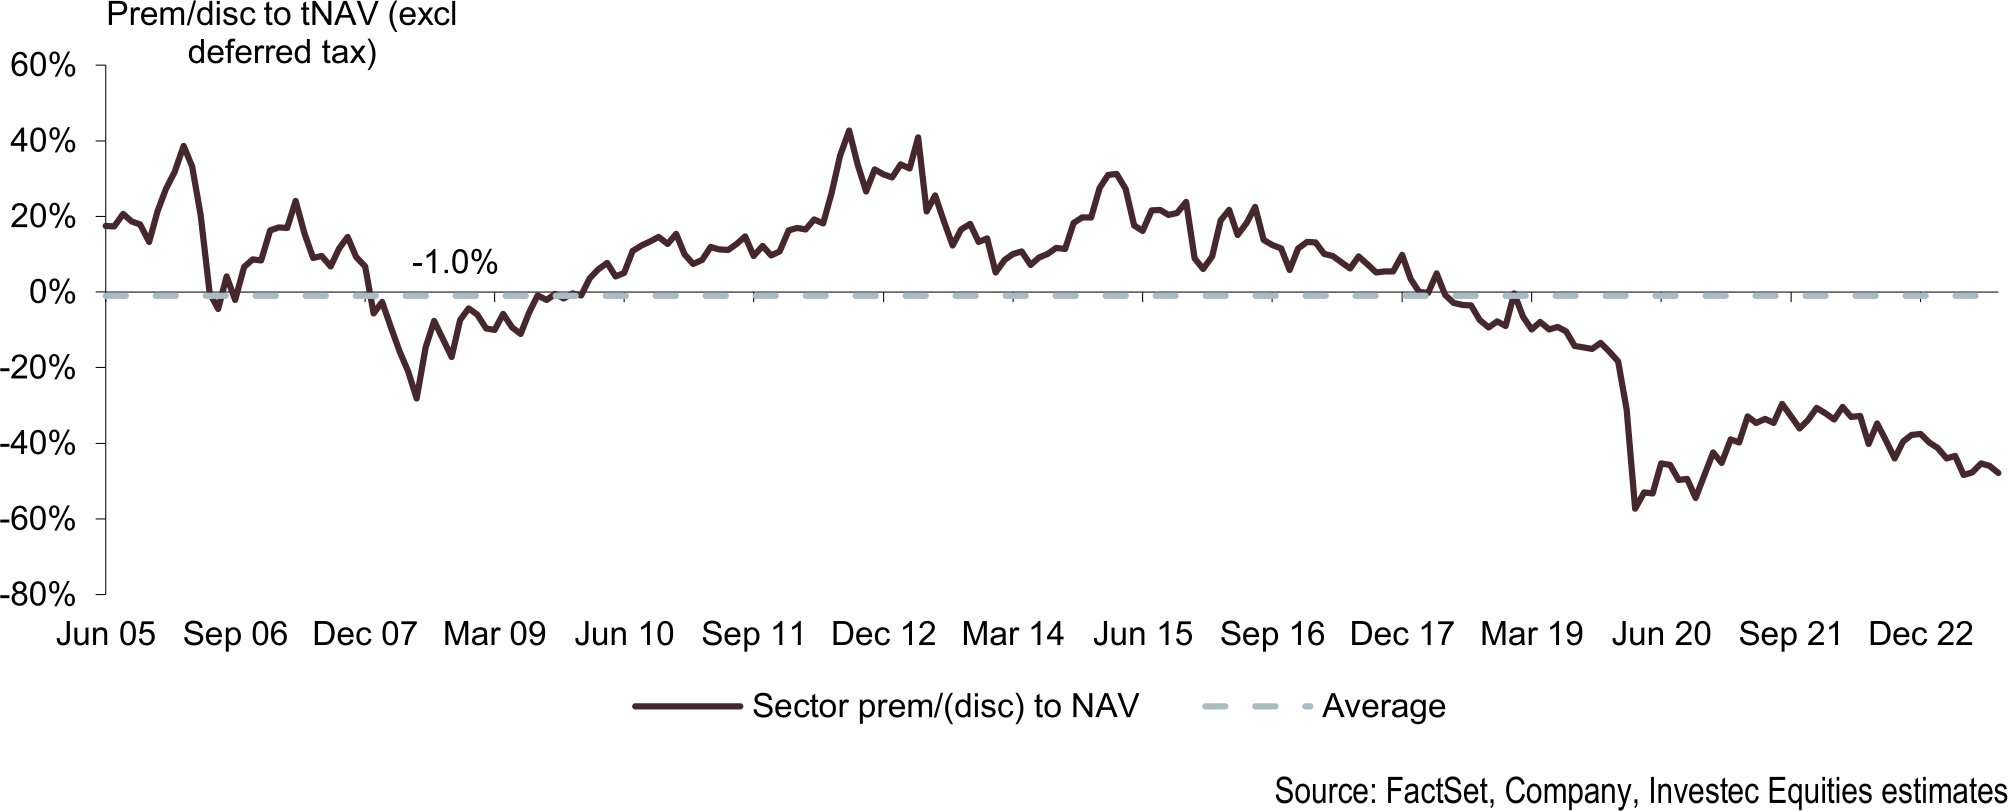 SA REITs traded around 17% lower than underlying NAVs which presents a considerable price upside from current levels if conditions begin to normalise.